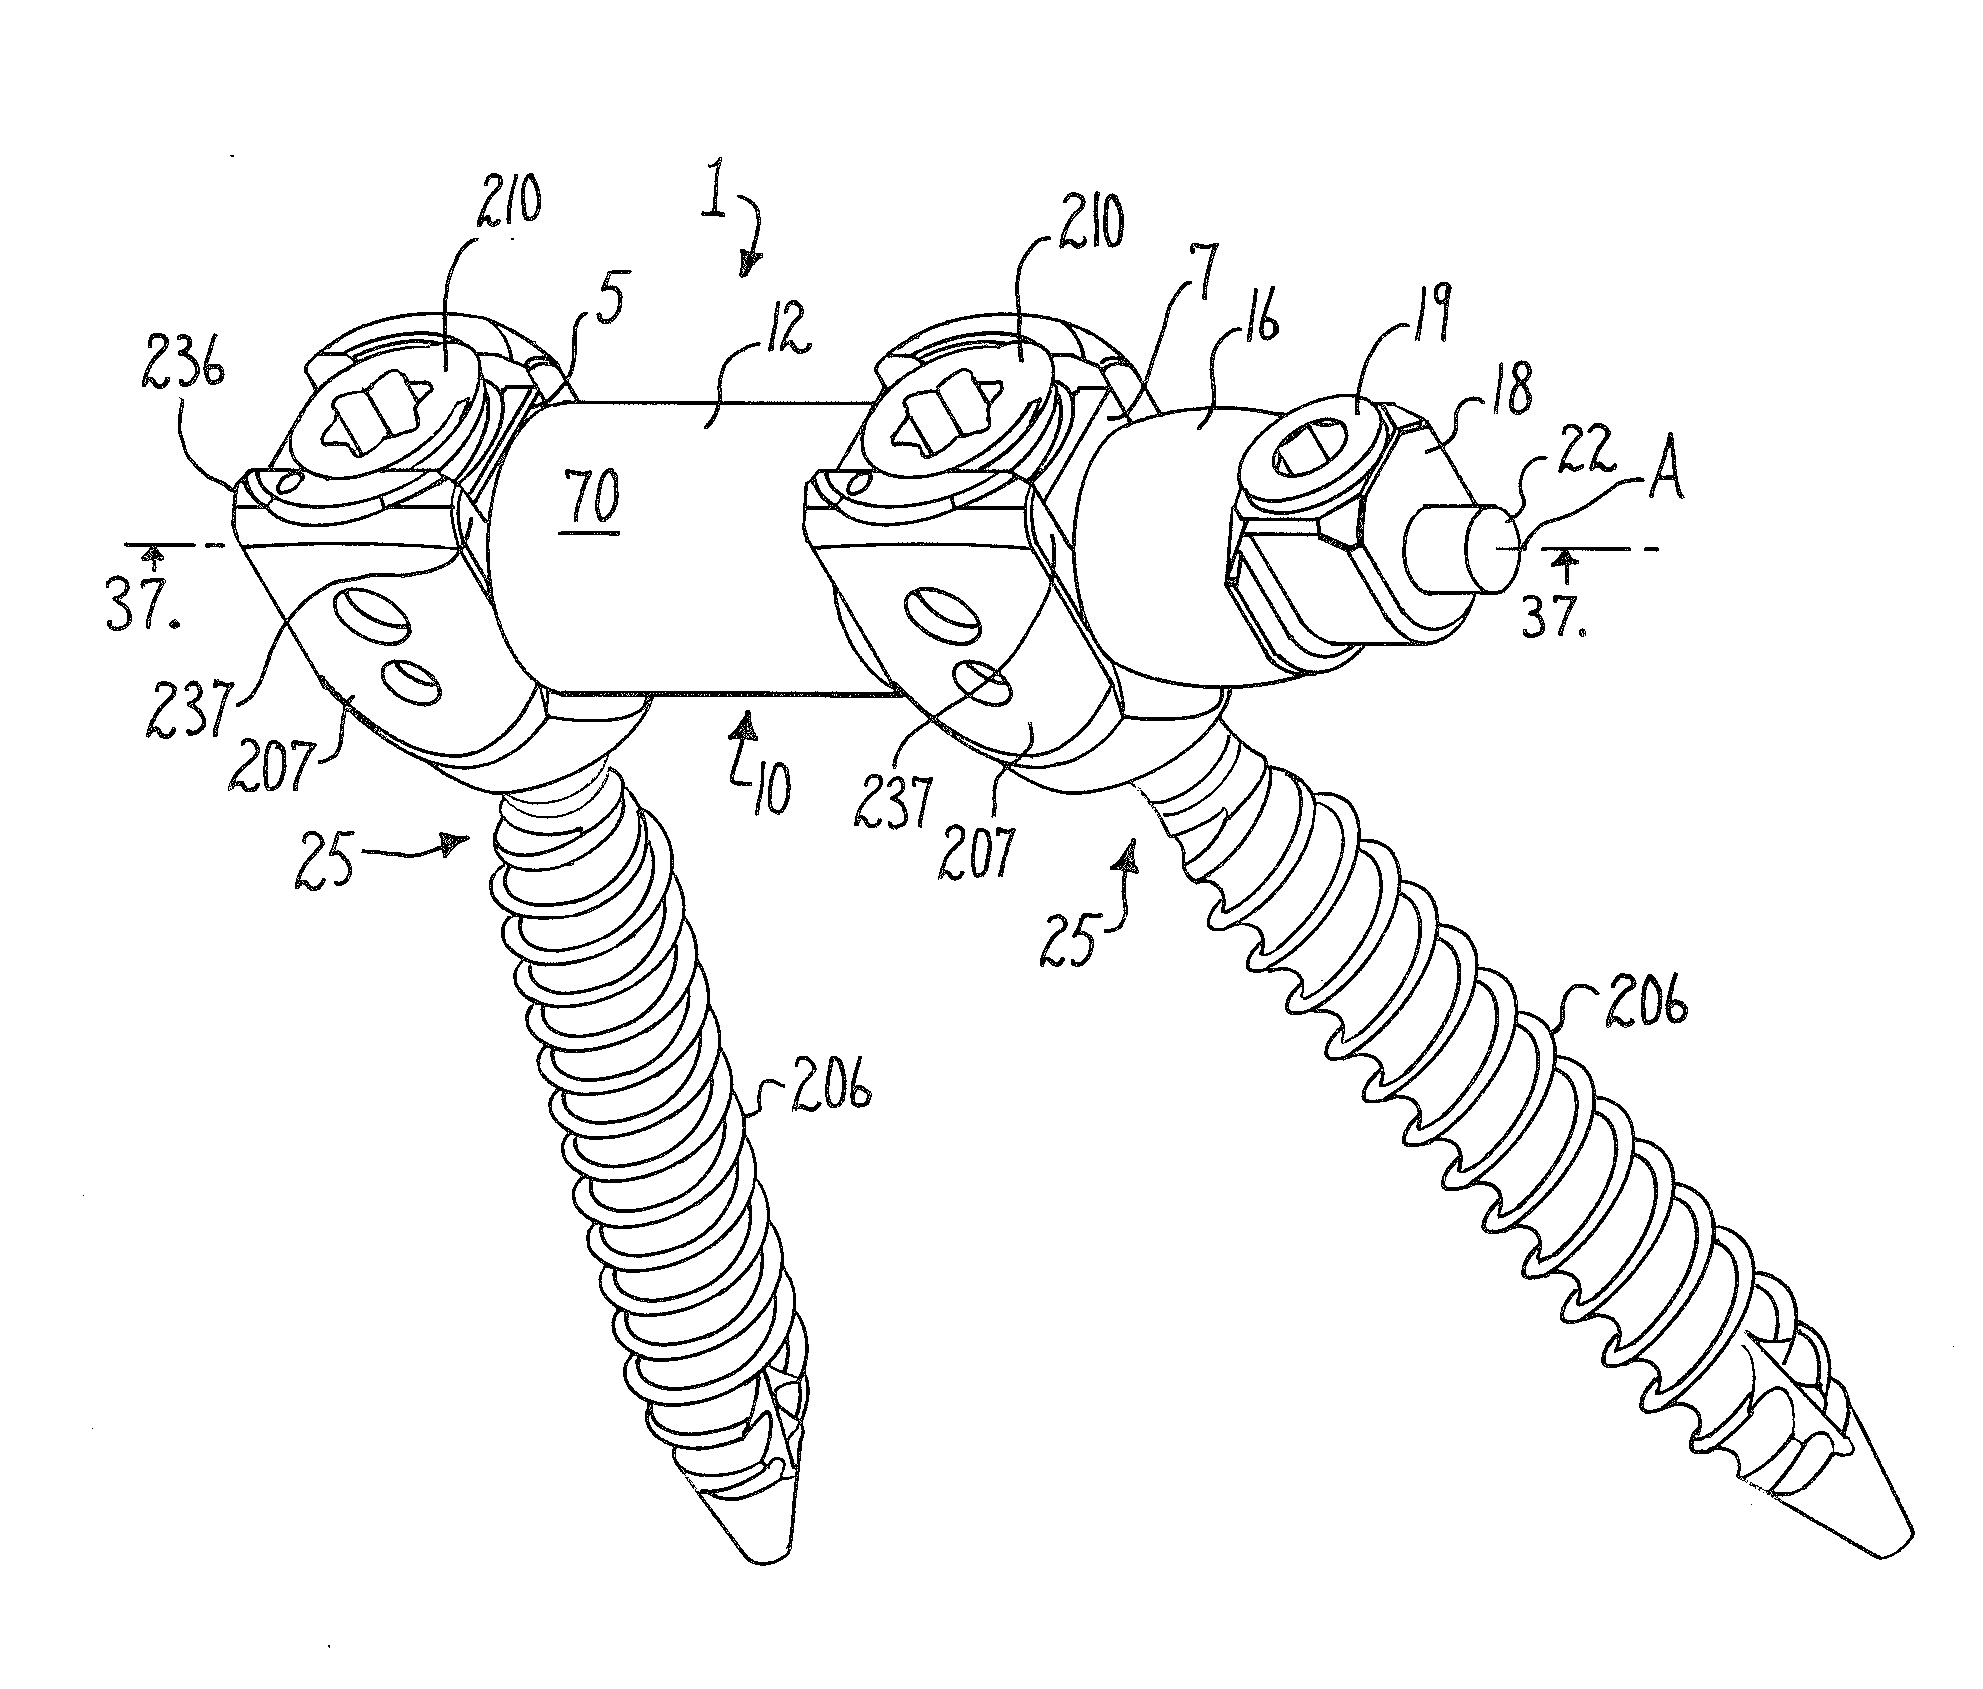 Longitudinal connecting member with sleeved tensioned cords